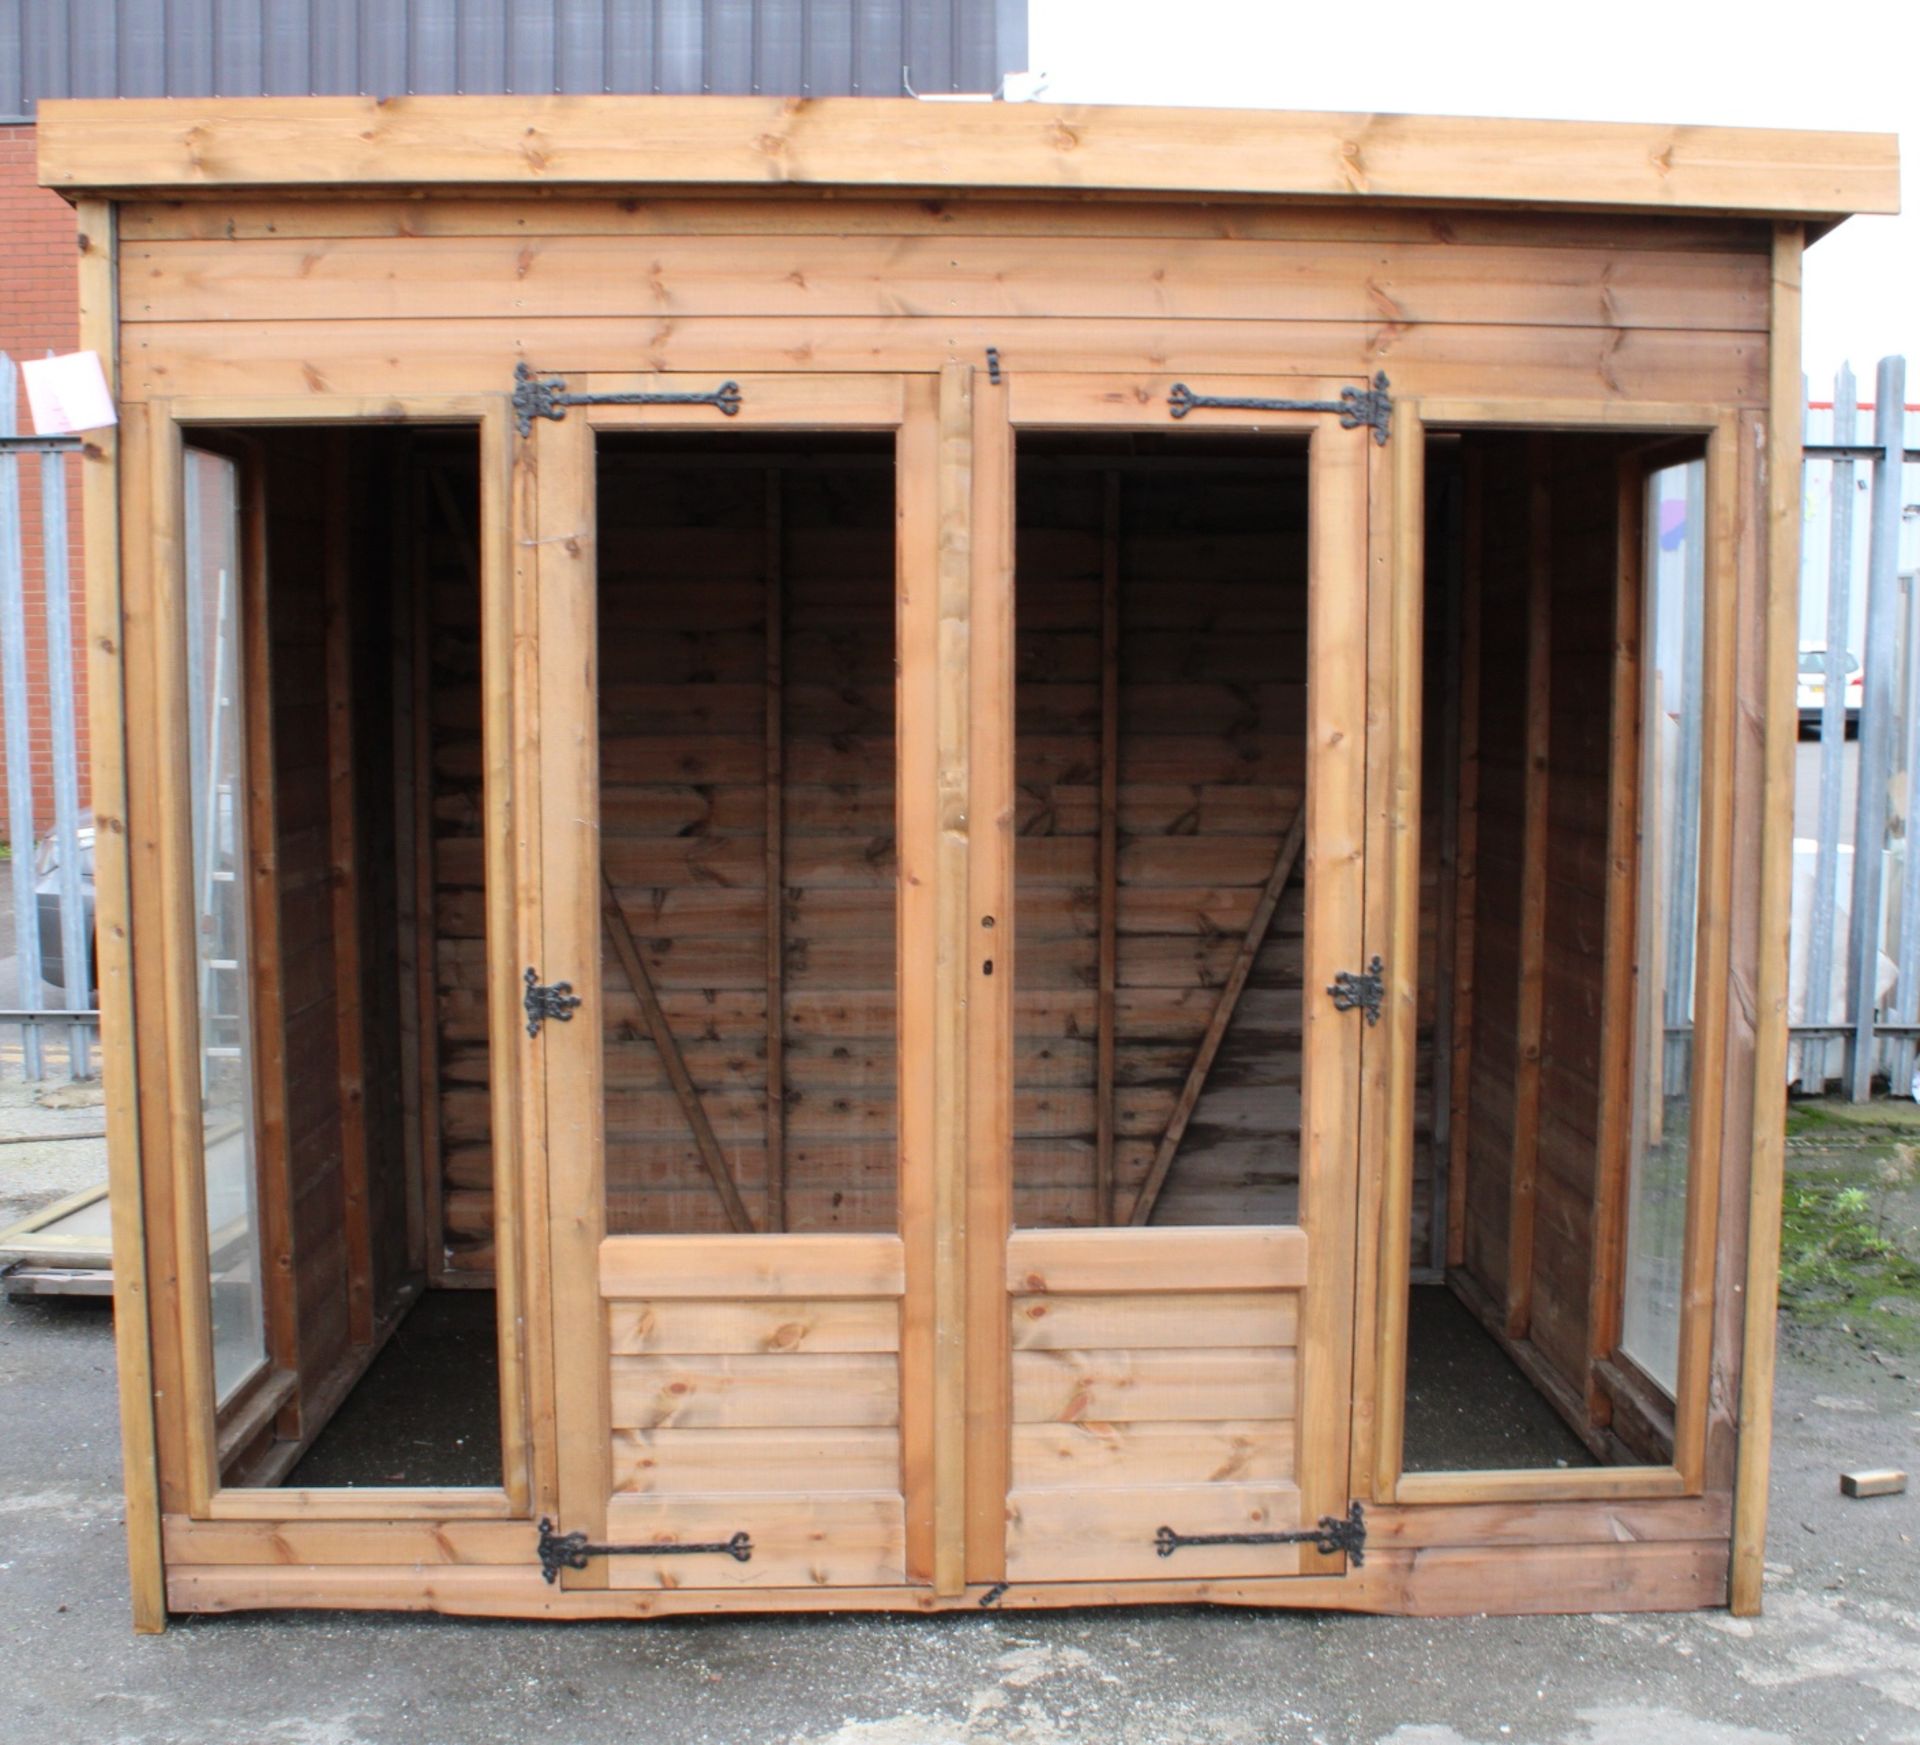 8x6 'clumber' summerhouse timber shed building, Standard 16mm Nominal Cladding - Image 2 of 2